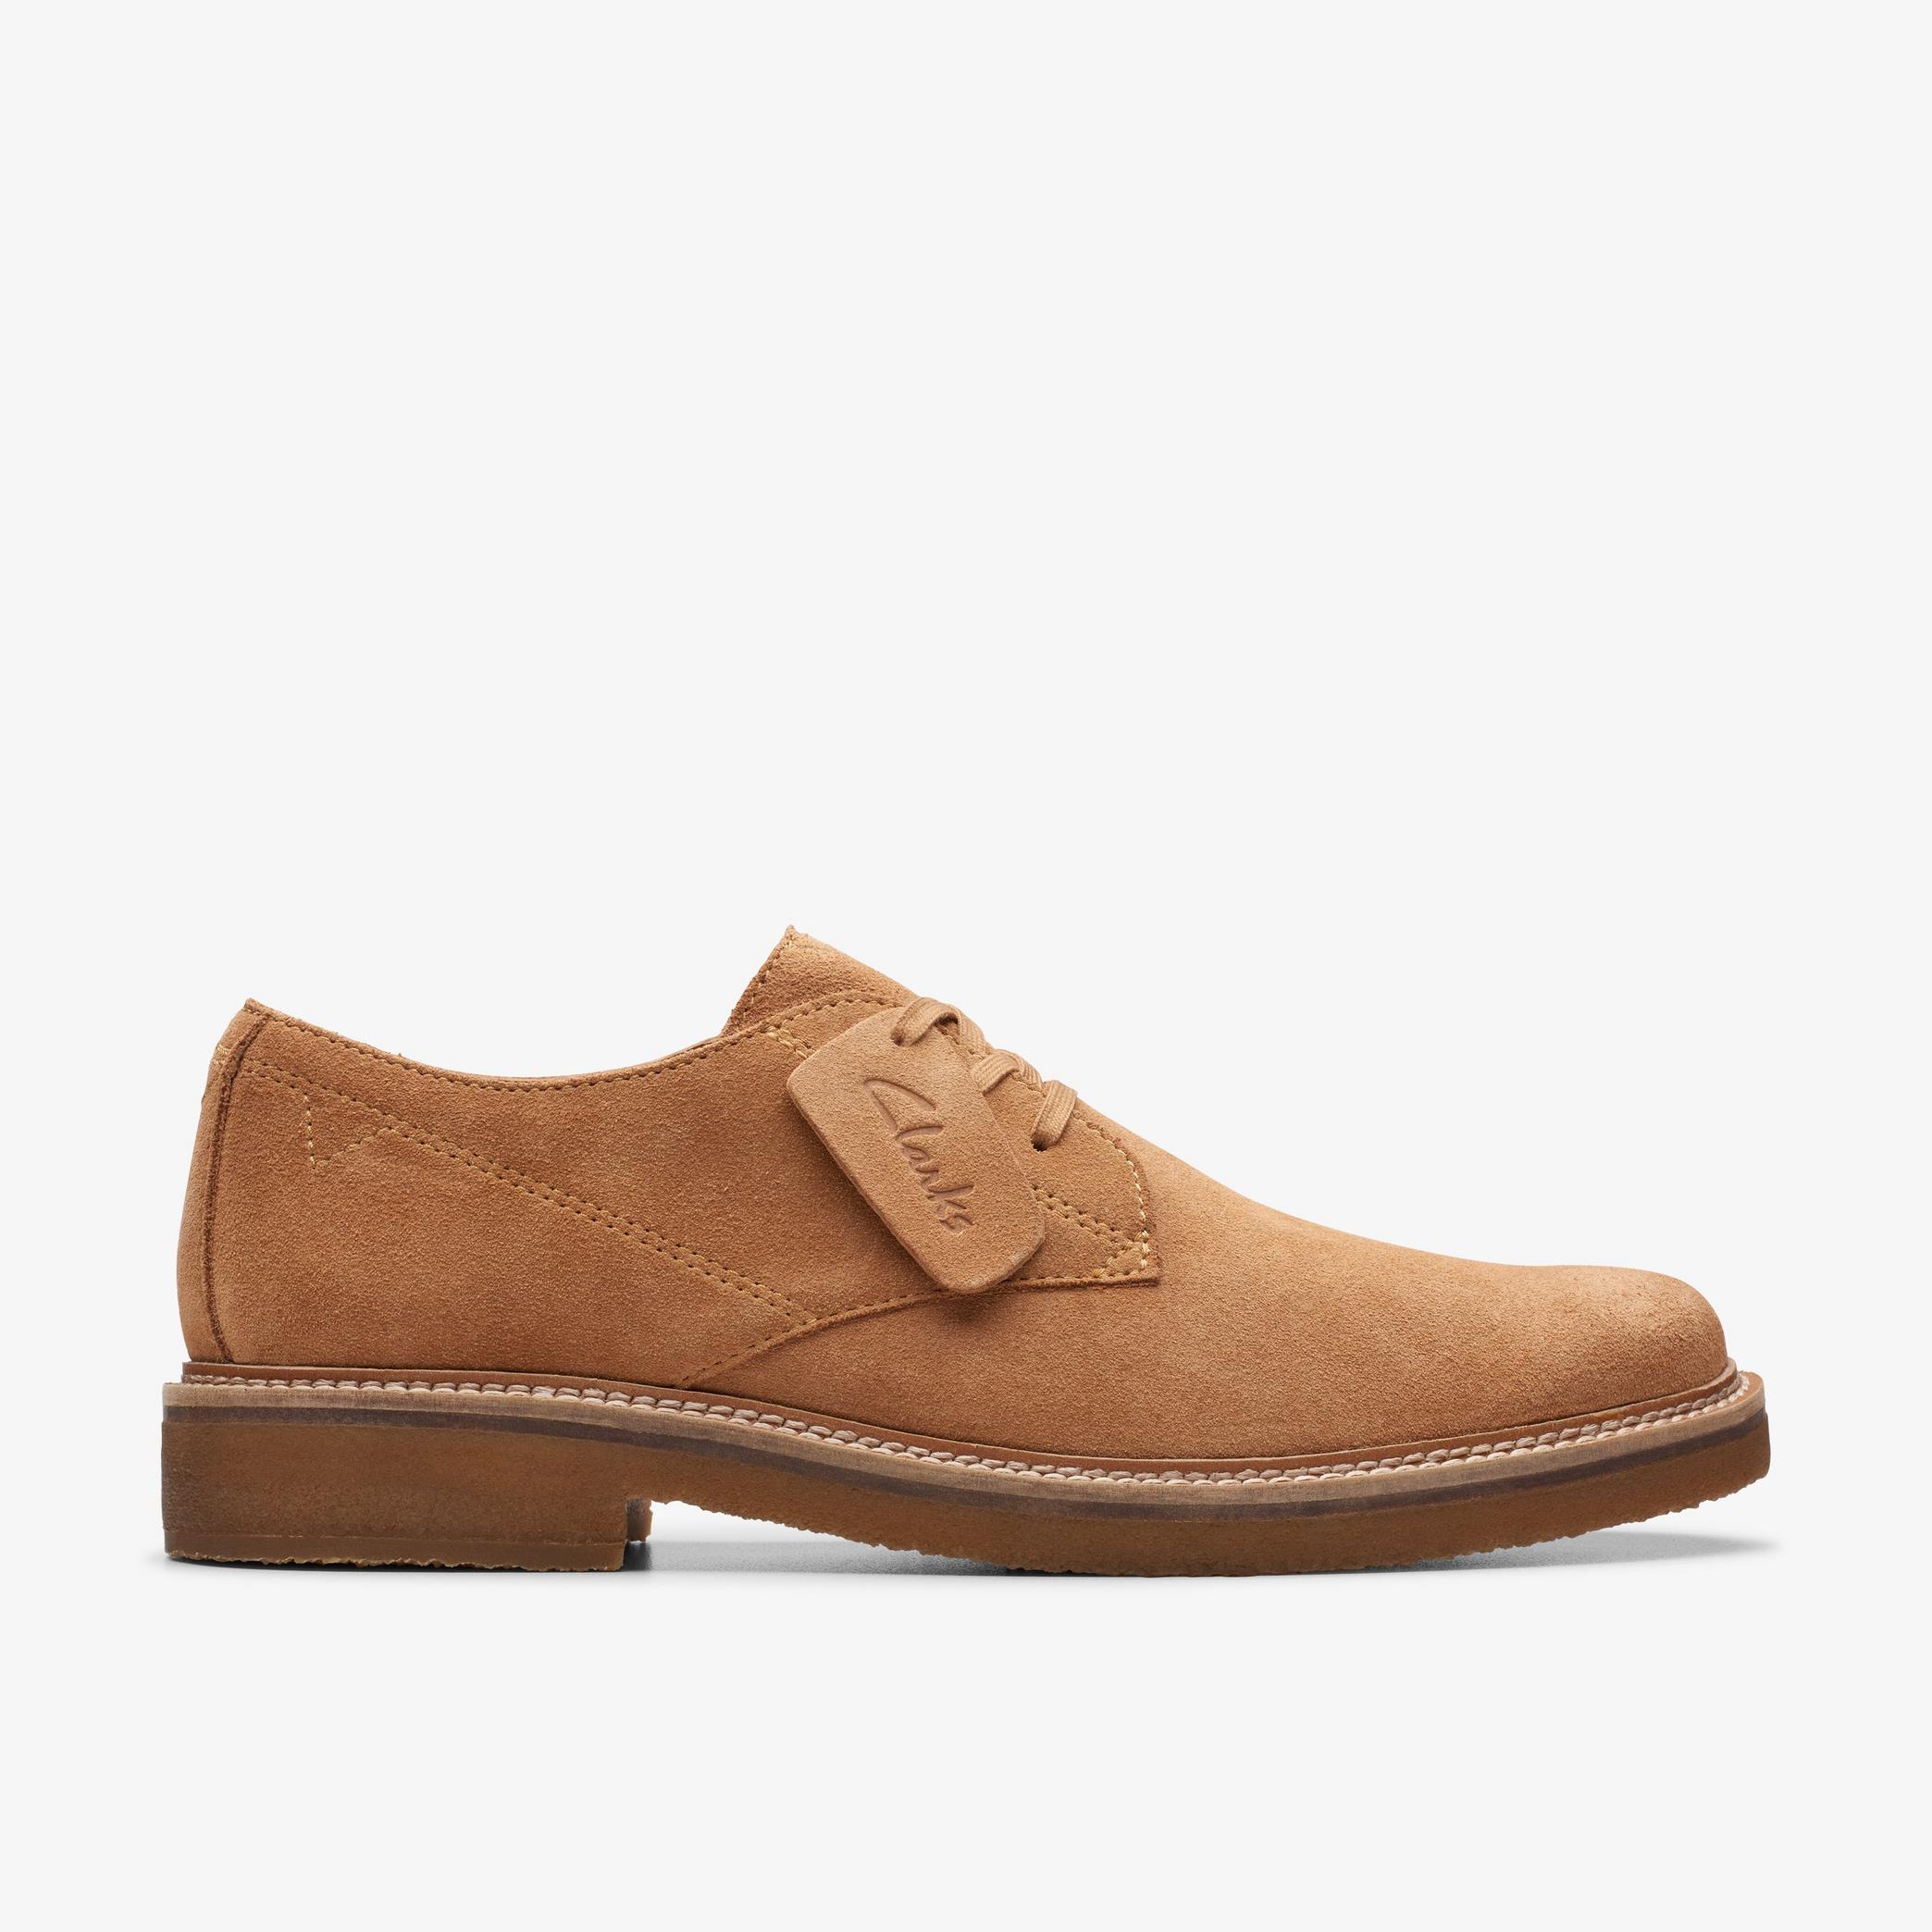 Clarkdale Derby Light Tan Suede Oxford Shoes, view 1 of 6